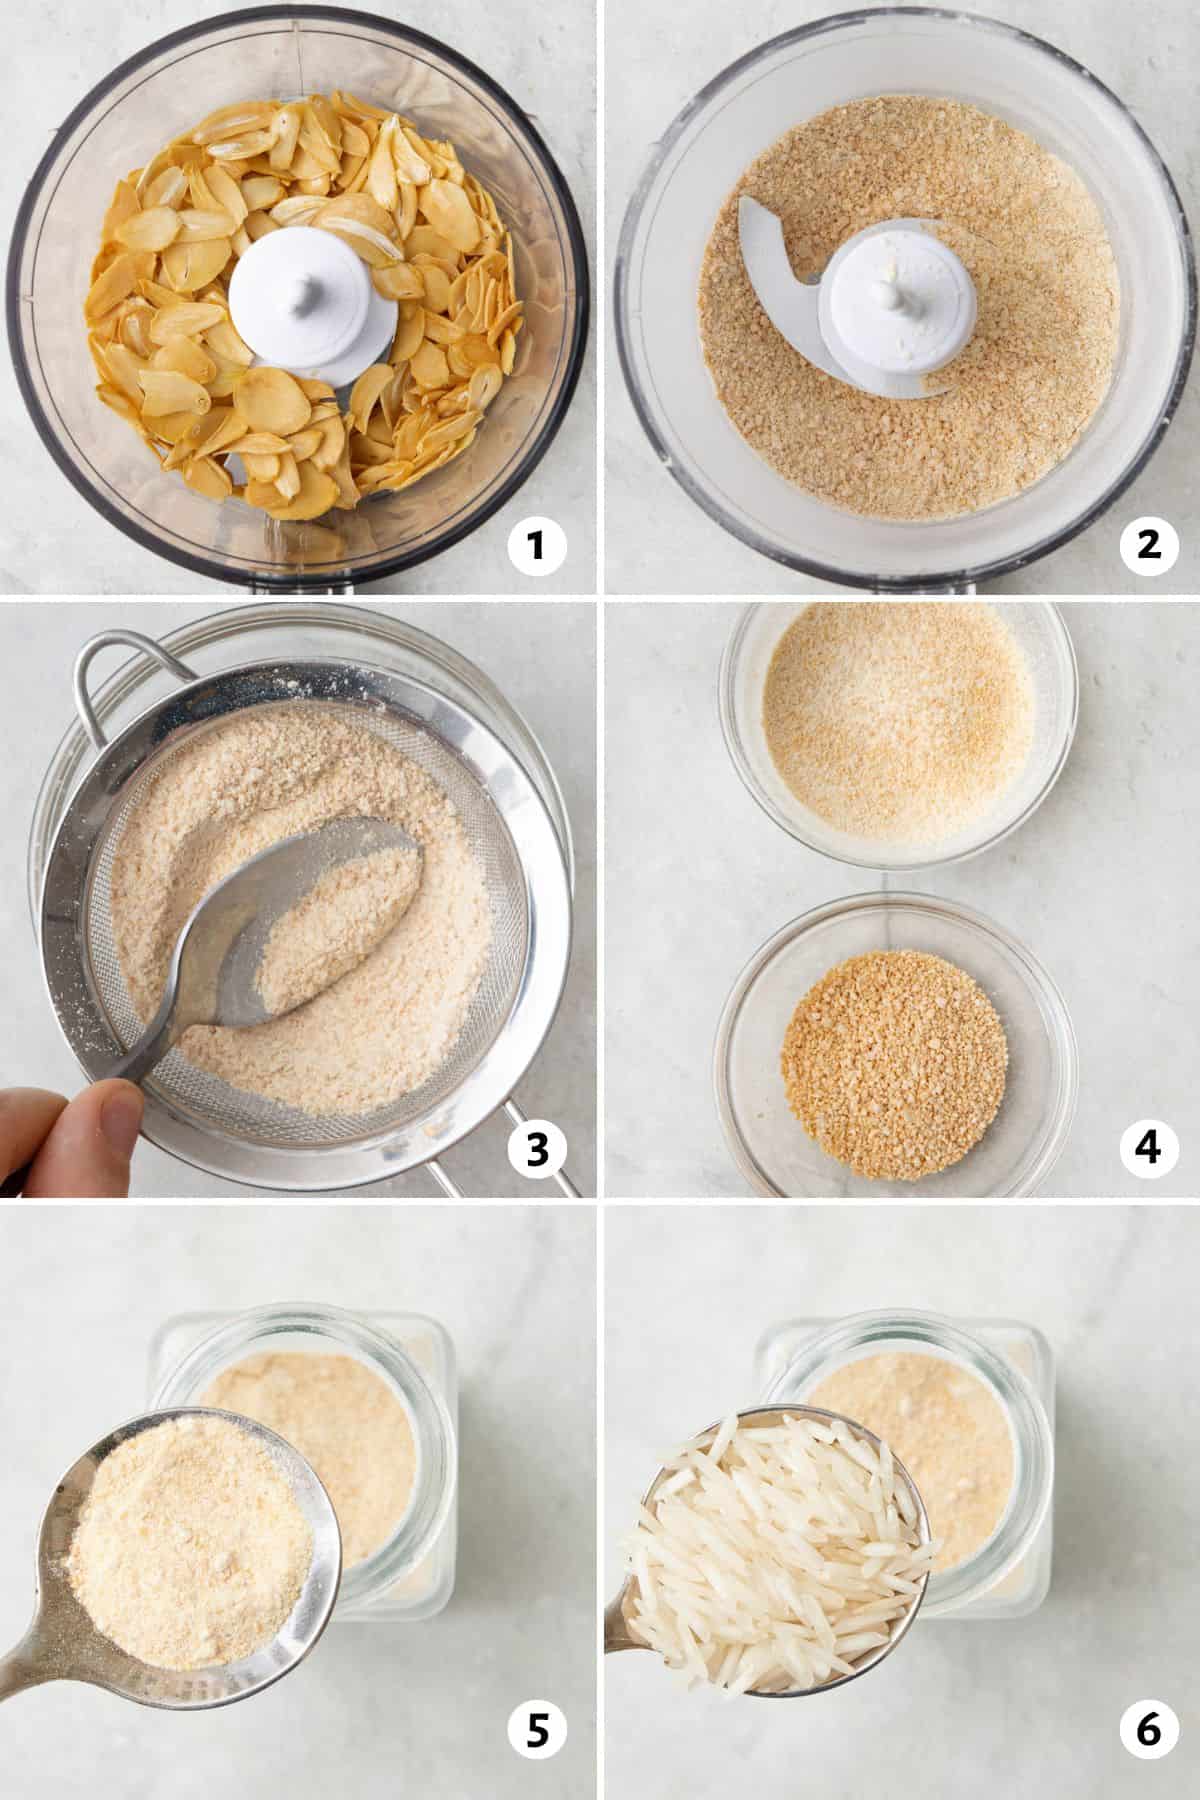 6 image collage making spice: 1- dried garlic slices in a food processor, 2- after grinding into powder, 3- sifting powder over a bowl, 4- bowl of garlic powder and garlic granules, 5- spoon adding garlic powder to a spice jar, 6- adding rice to jar.